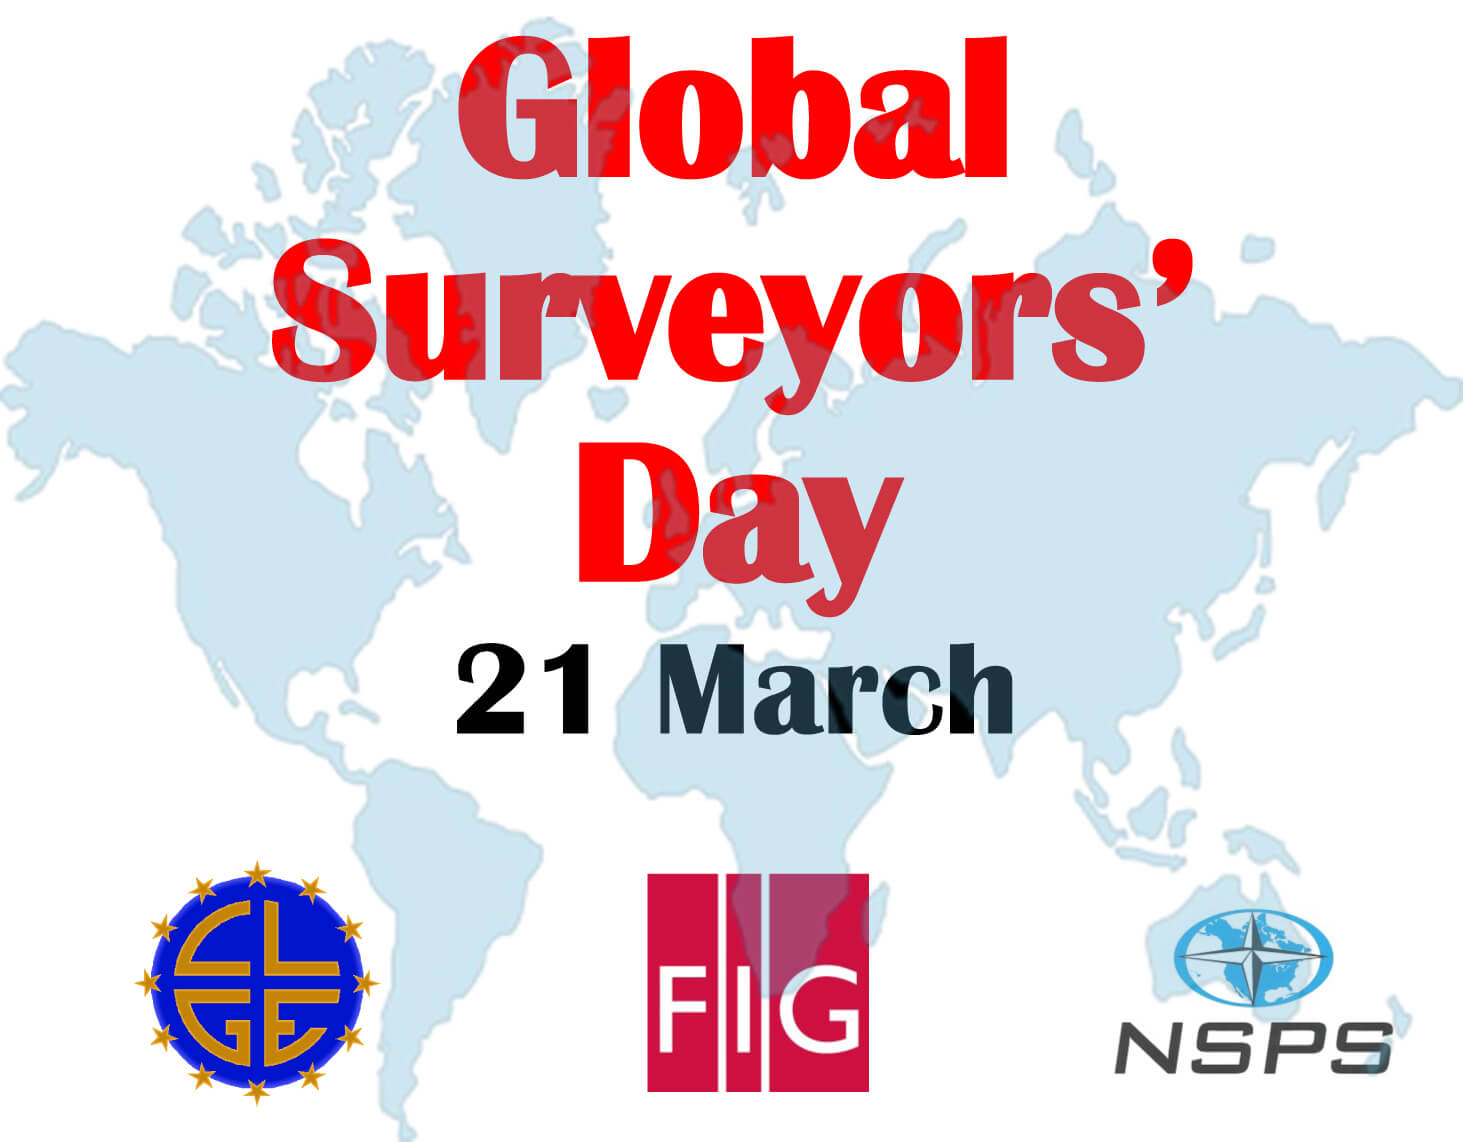 Image of a world map with the text: Global Surveyors' day 21 March and three logos, for the Council of European Geodetic Surveyors (CLGE), the National Society of Professional Surveyors (NSPS), and the International Federation of Surveyors (FIG)